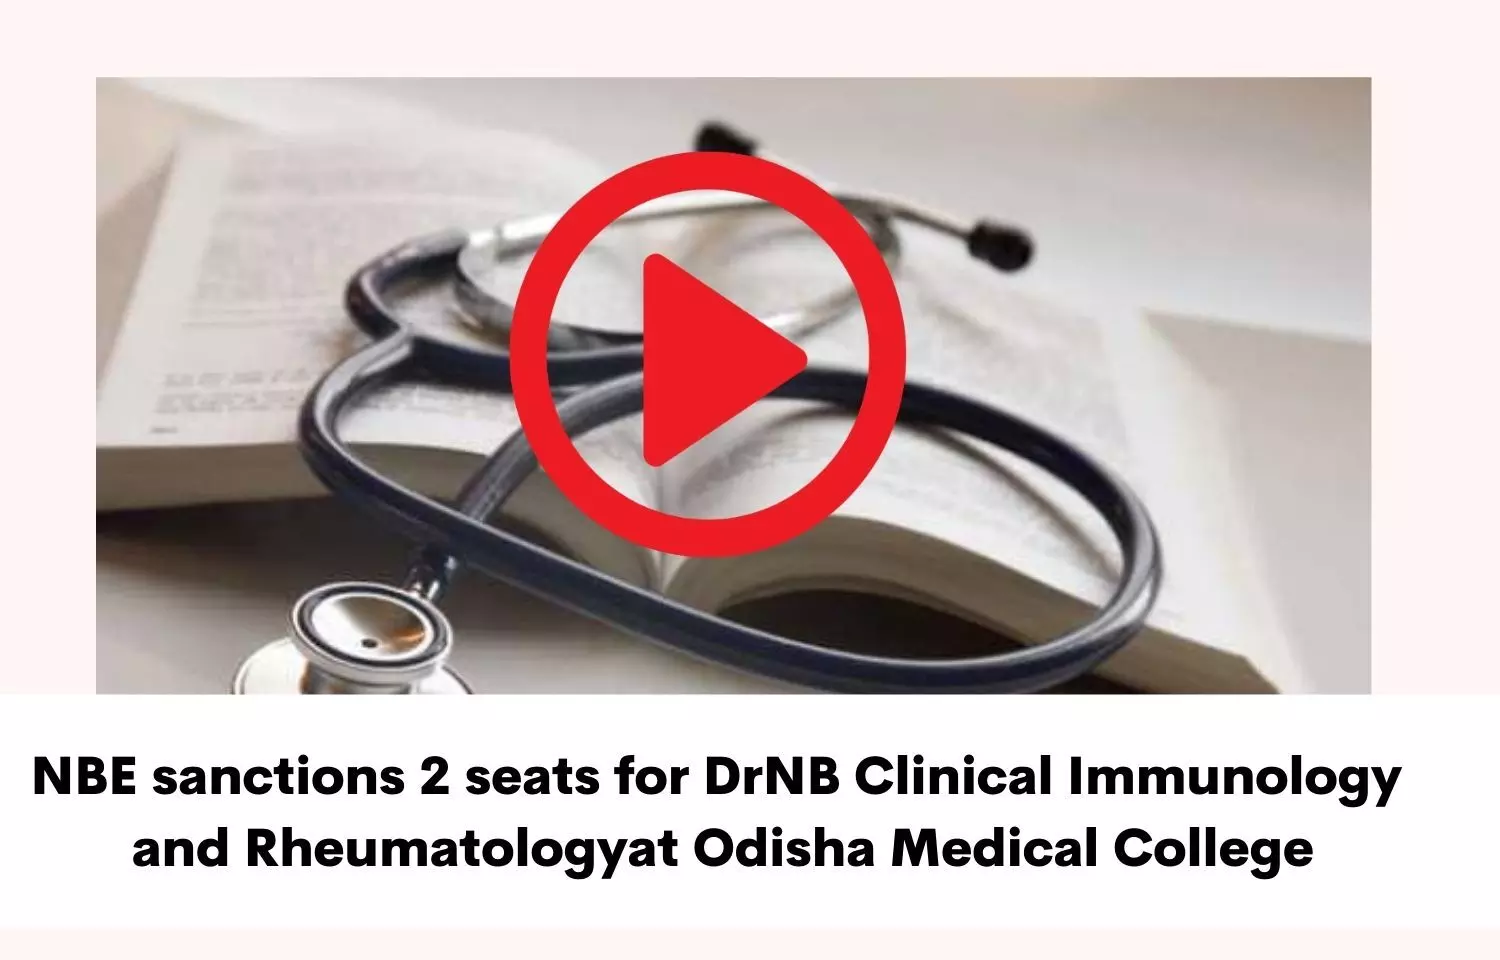 NBE sanctions 2 seats for DrNB Clinical Immunology, Rheumatology